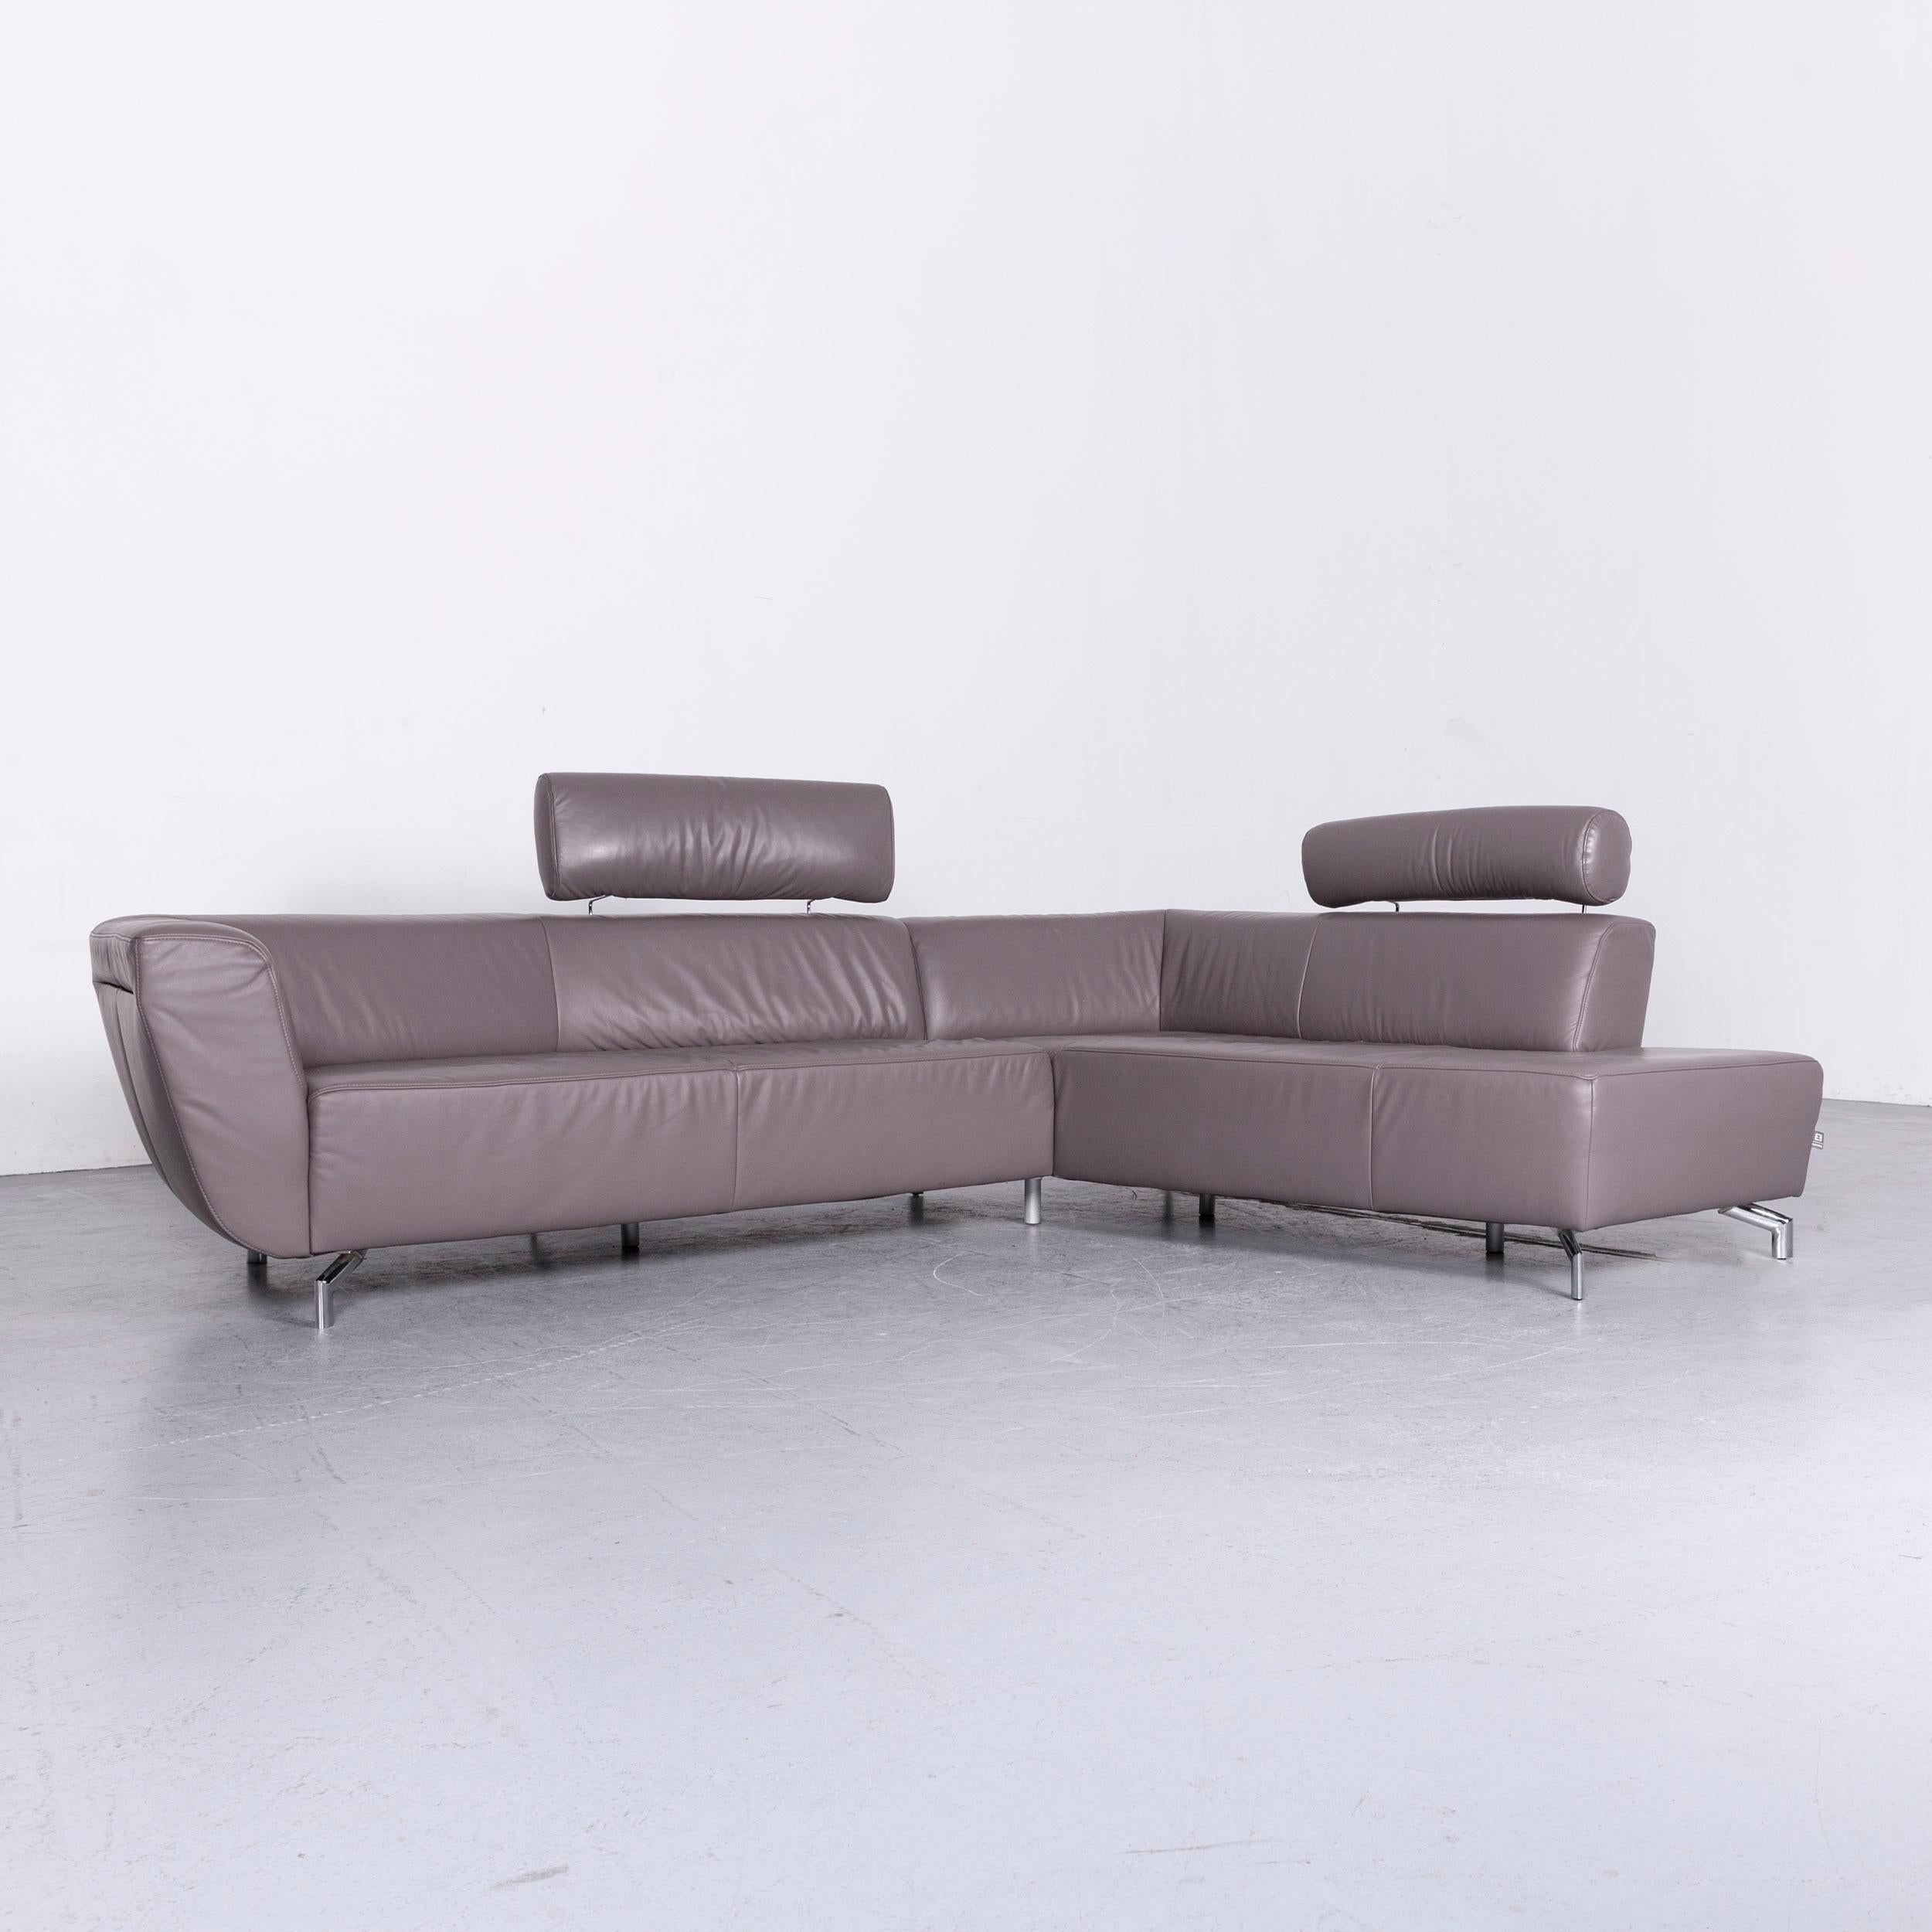 We bring to you an Ewald Schillig designer sofa leather grey corner couch.